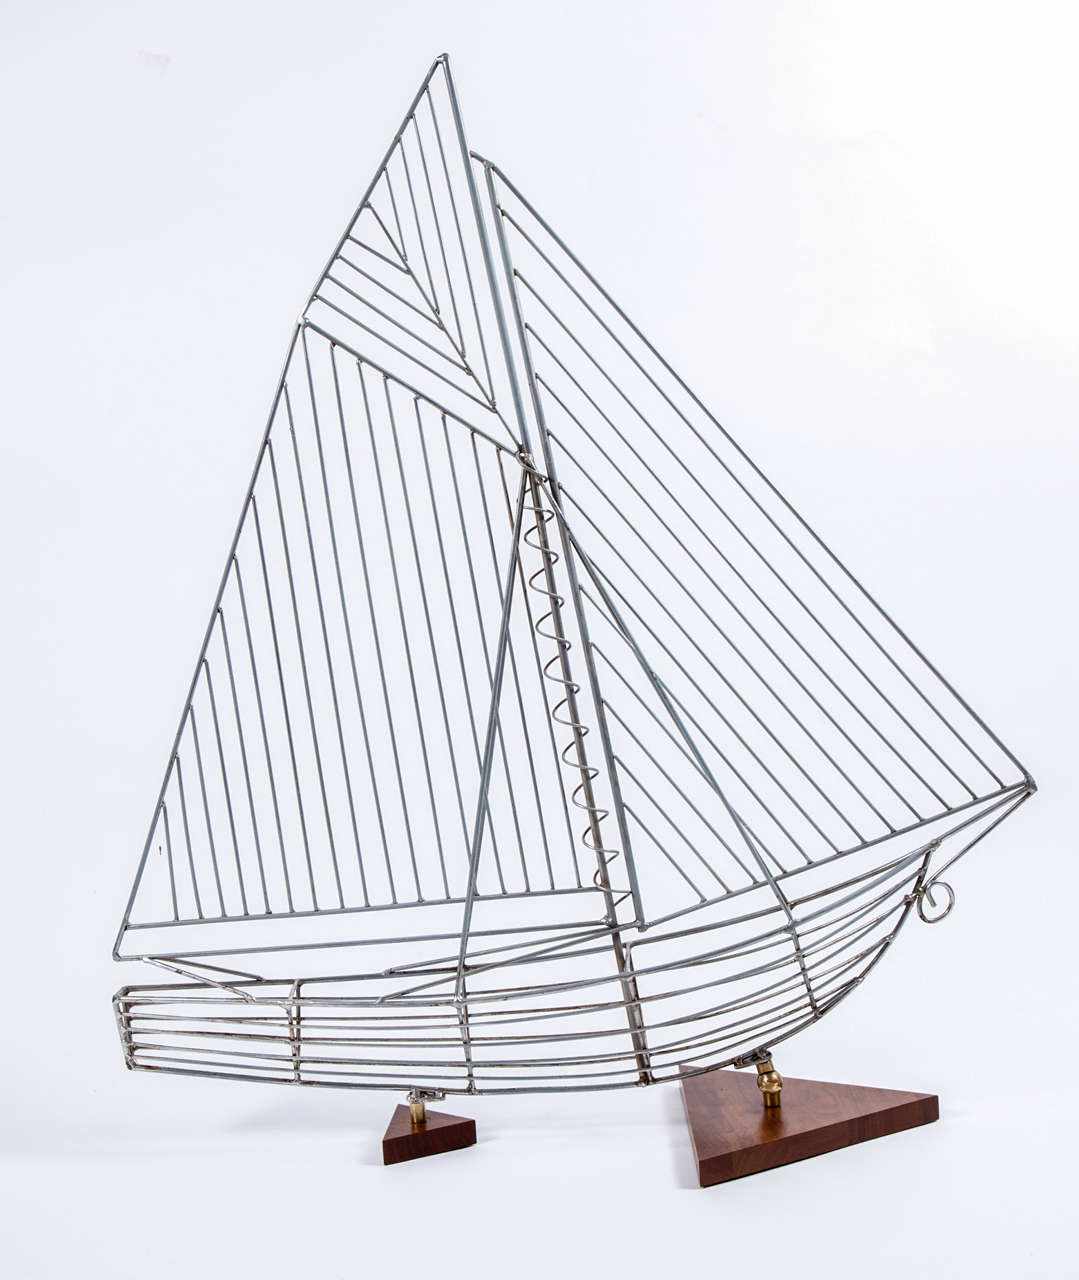 Modern sailboat model made of steel rods and mounted on triangular stained-wood bases.  USA, circa 1970.